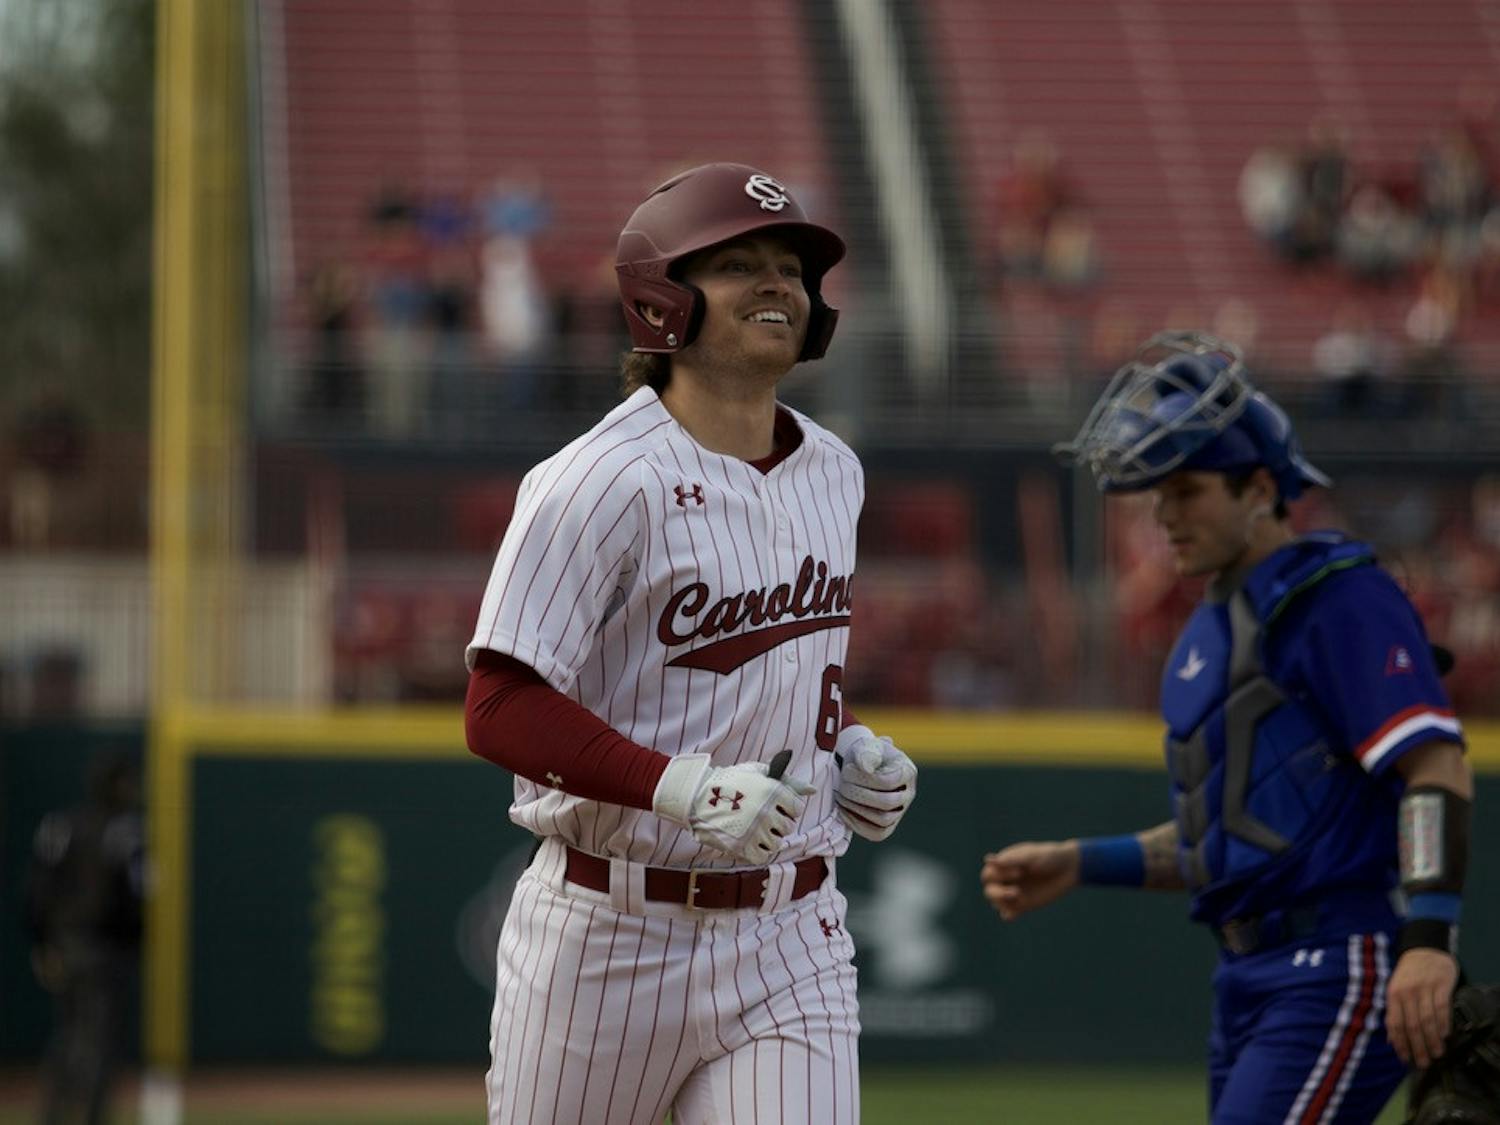 Fifth-year infielder Will McGillis grins after firing a home run into the stands and putting the Gamecocks up 17-3 on UMass Lowell on Feb. 17, 2023. The Gamecocks finished the night with a 20-3 victory. &nbsp;